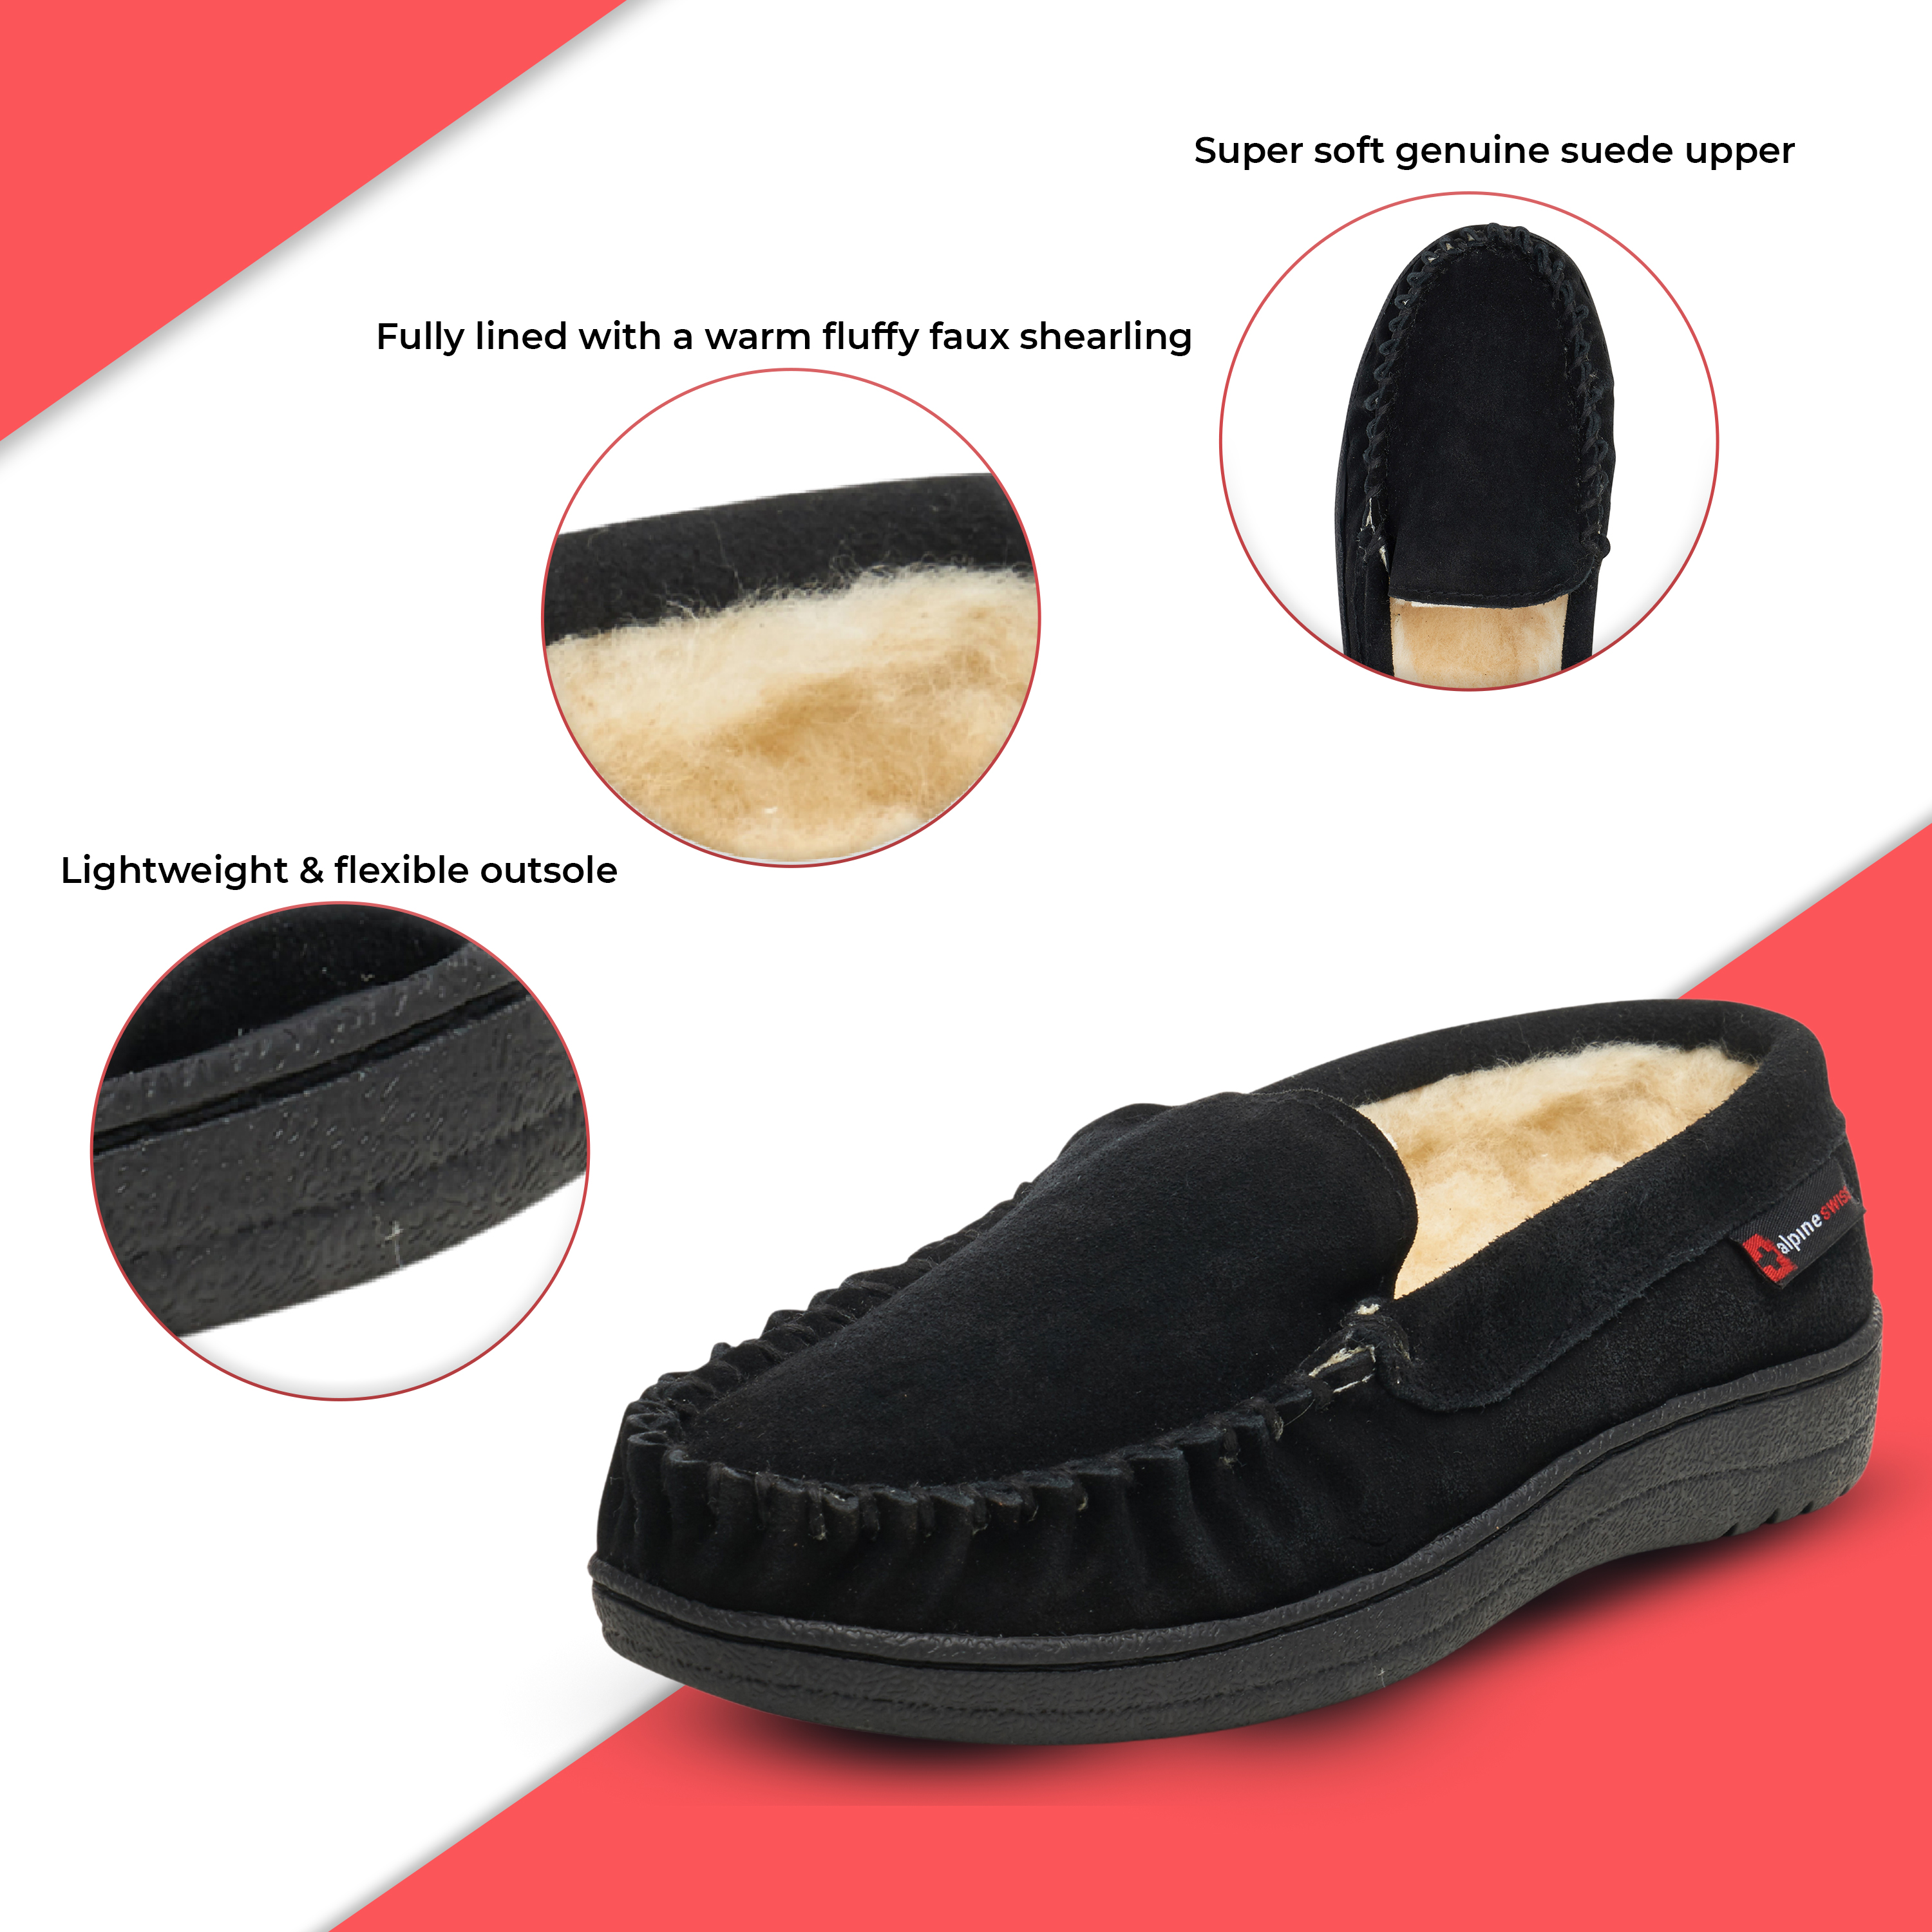 Alpine Swiss Yukon Mens Suede Shearling Moccasin Slippers Moc Toe Slip On Shoes - image 3 of 7